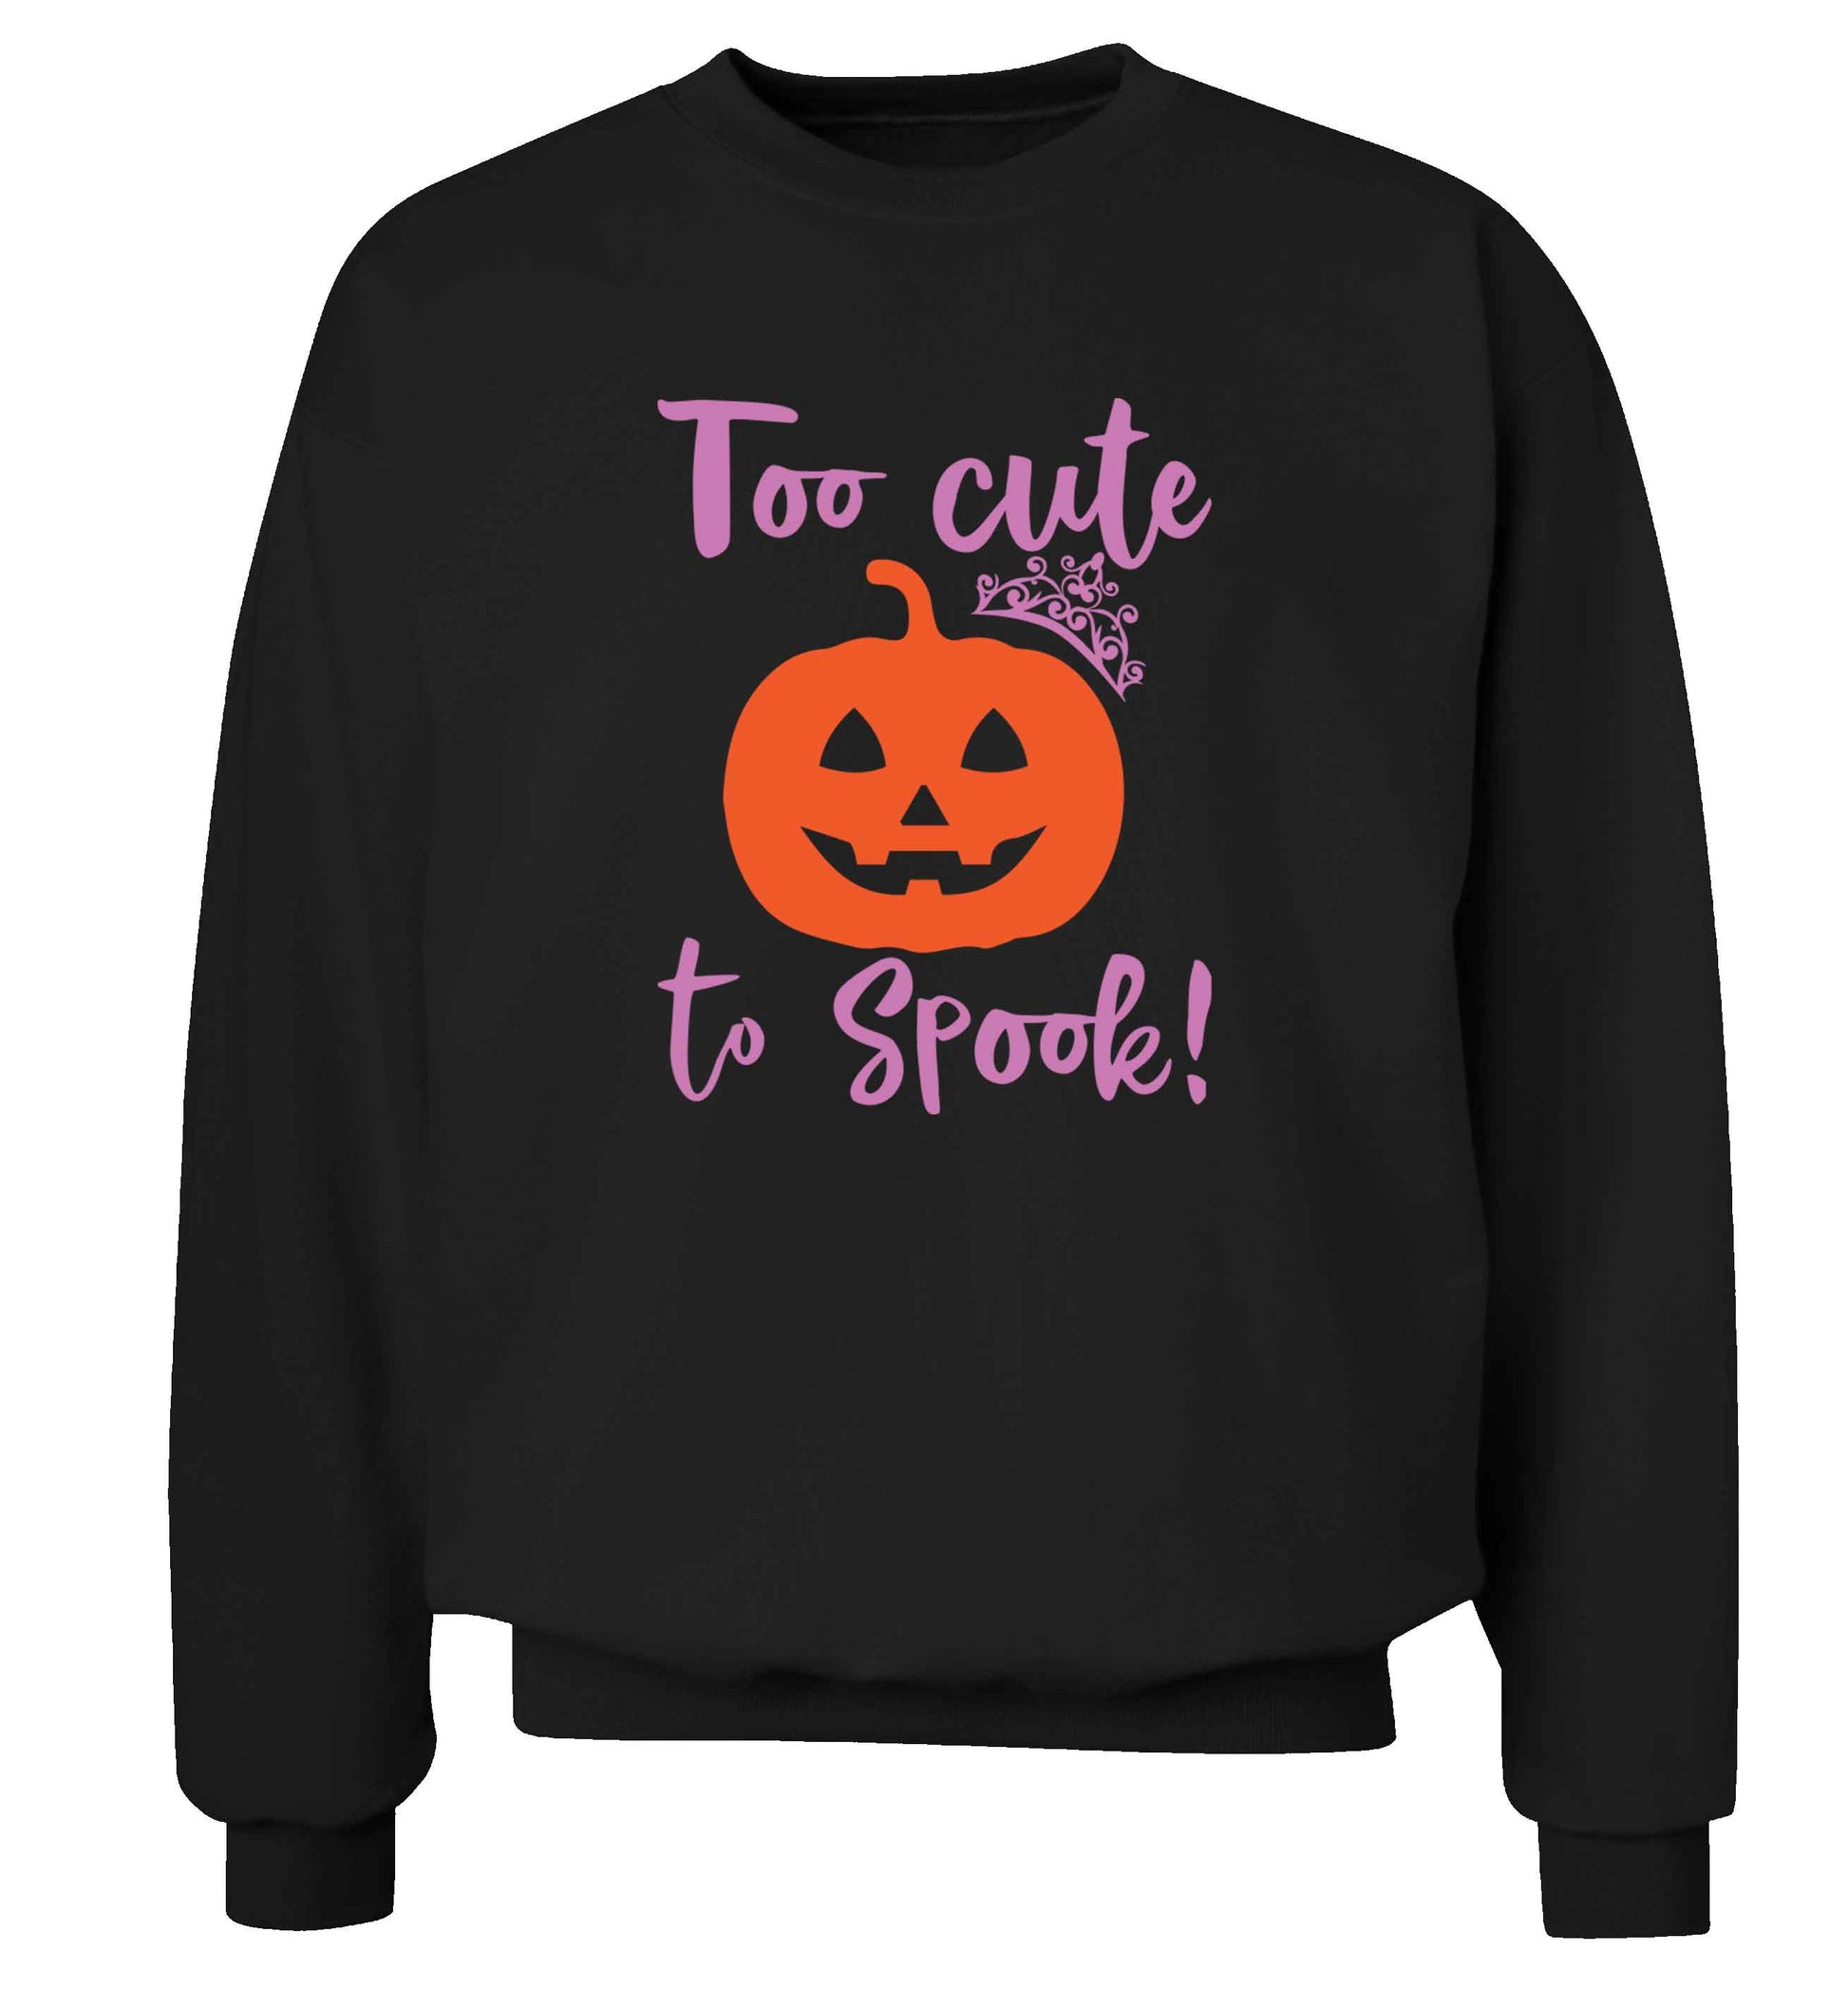 Too cute to spook! Adult's unisex black Sweater 2XL